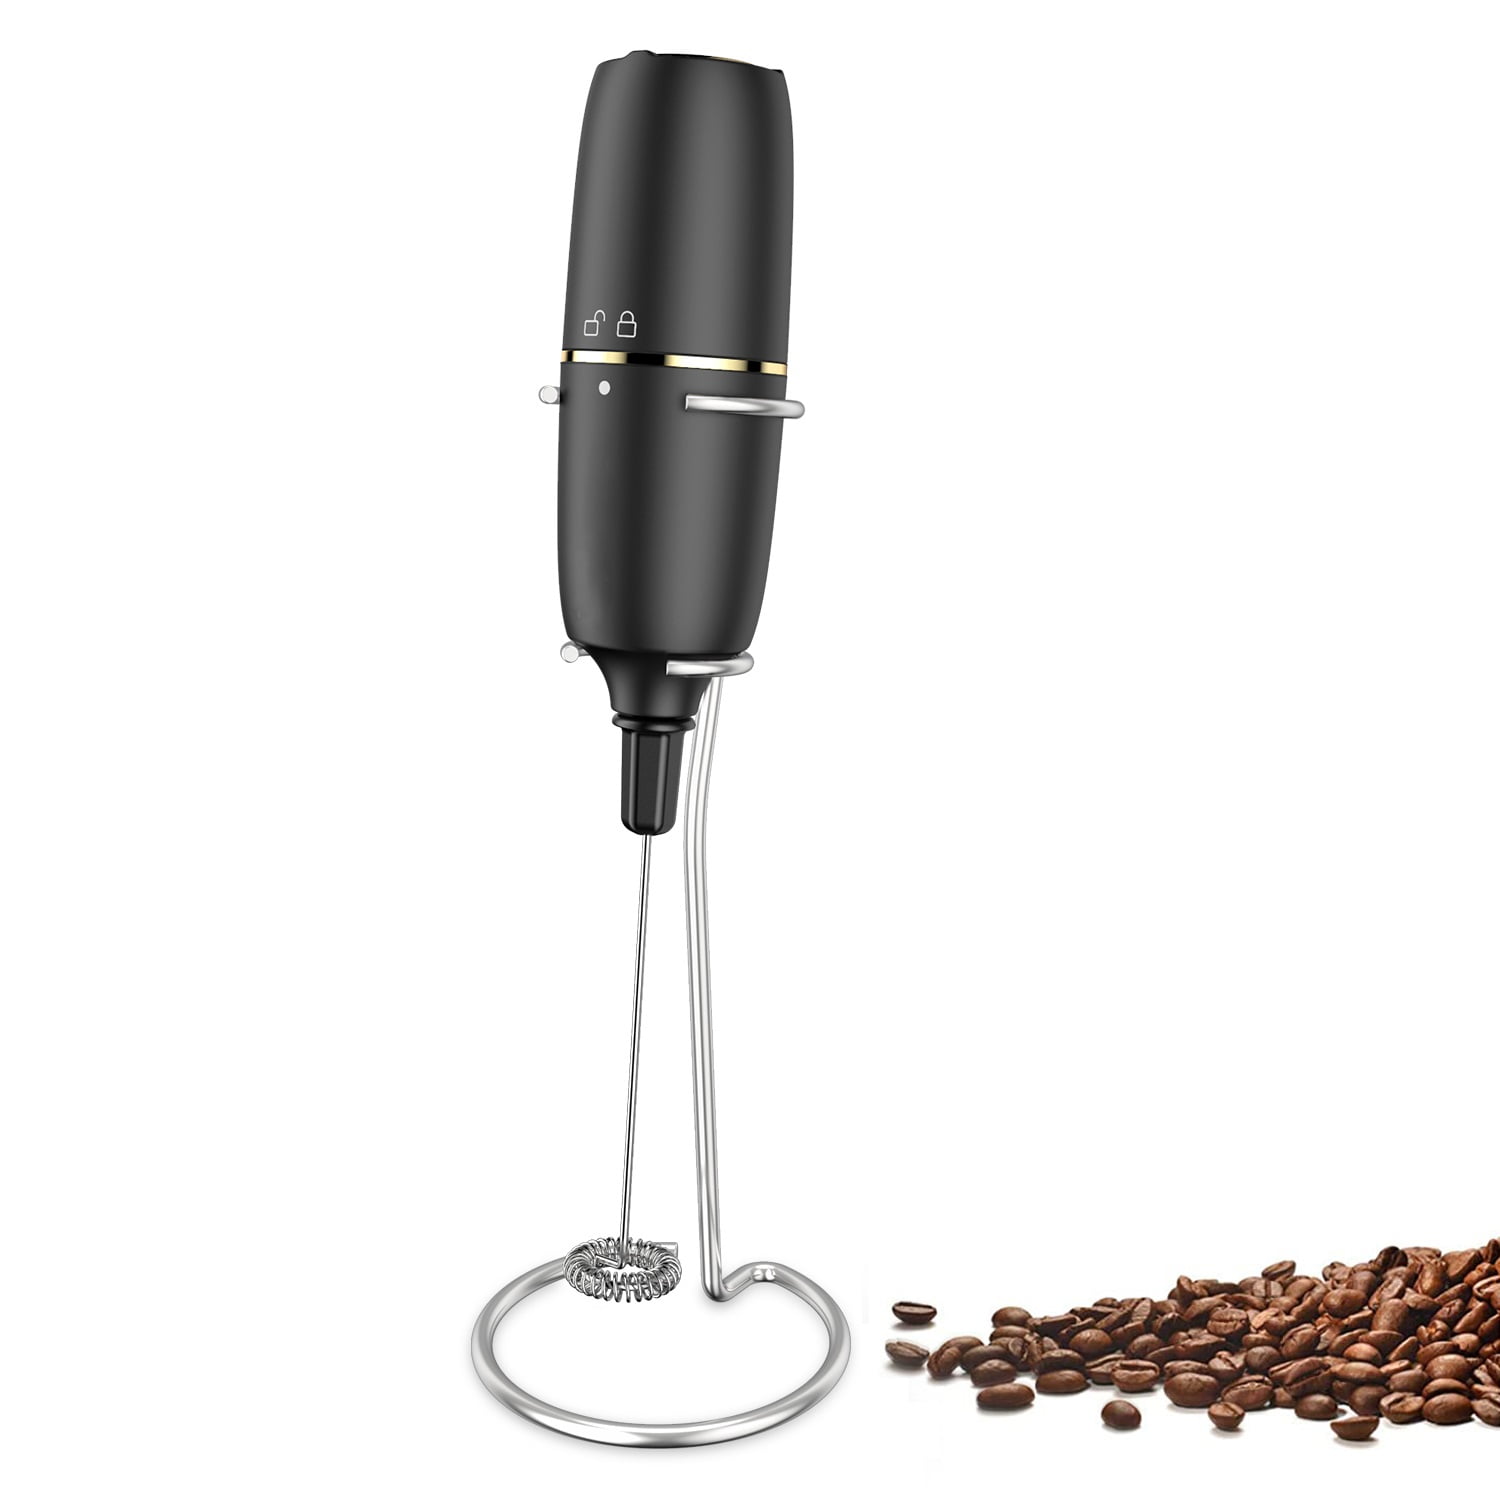  Milk Frother Handheld for Coffee with Stand - AGFOO hand frother  wand, Electric whisk Drink Mixer Mini Foamer for Cappuccino, Frappe,  Matcha, Hot Chocolate, Silver/Black: Home & Kitchen